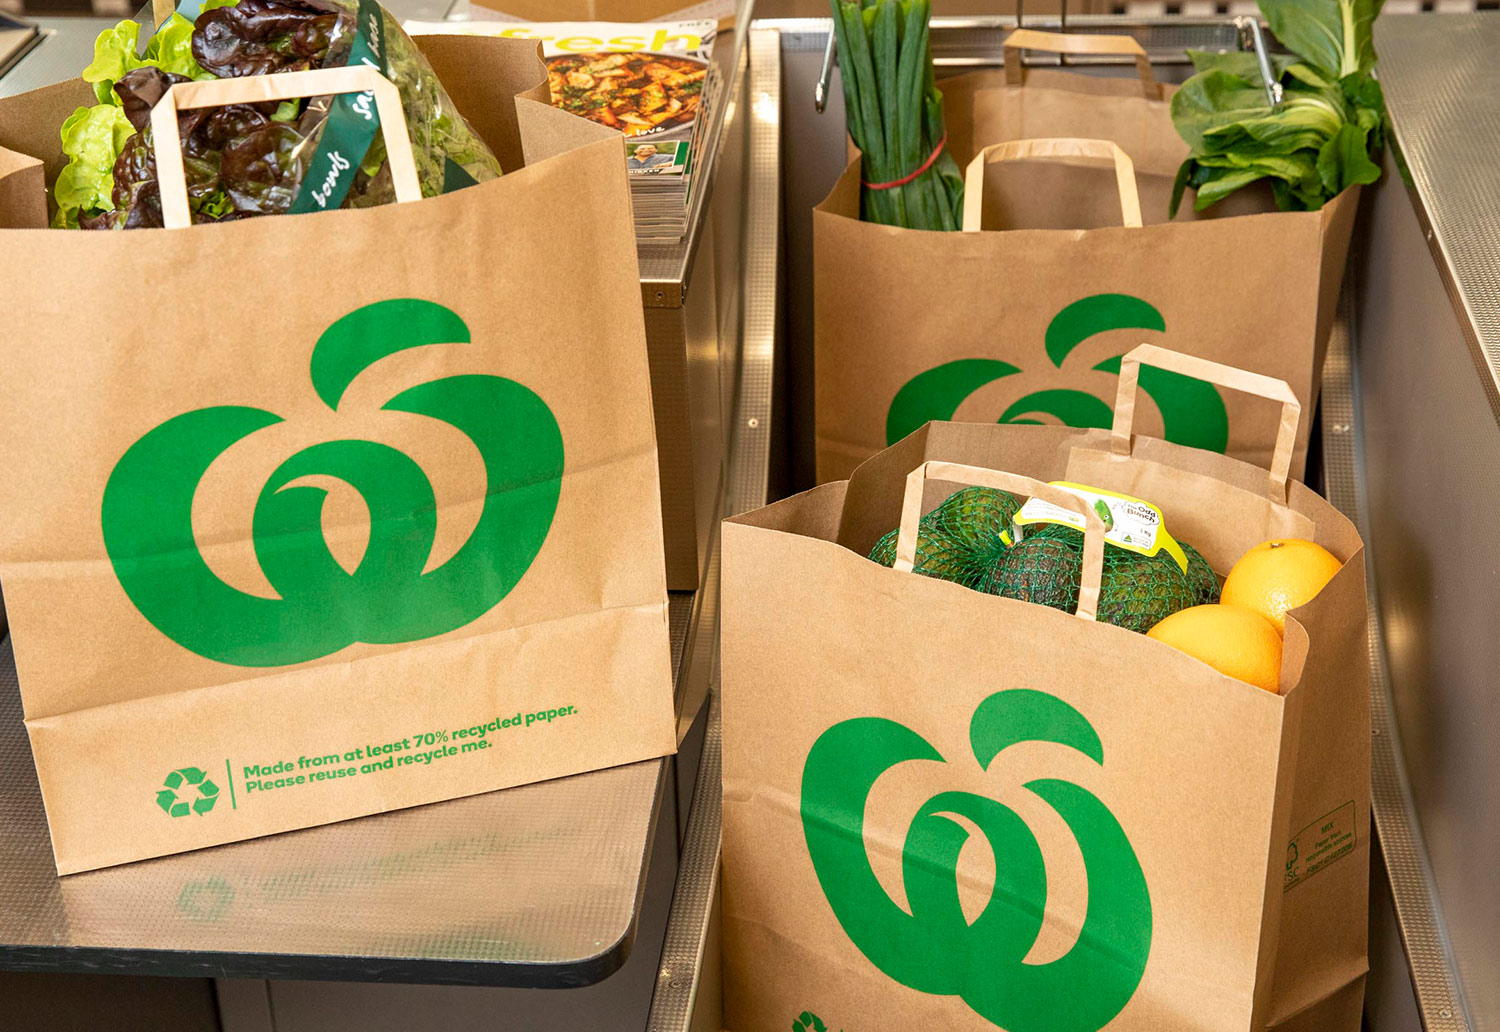 Image of Woolworths paper carry bags by Detpak at the checkout